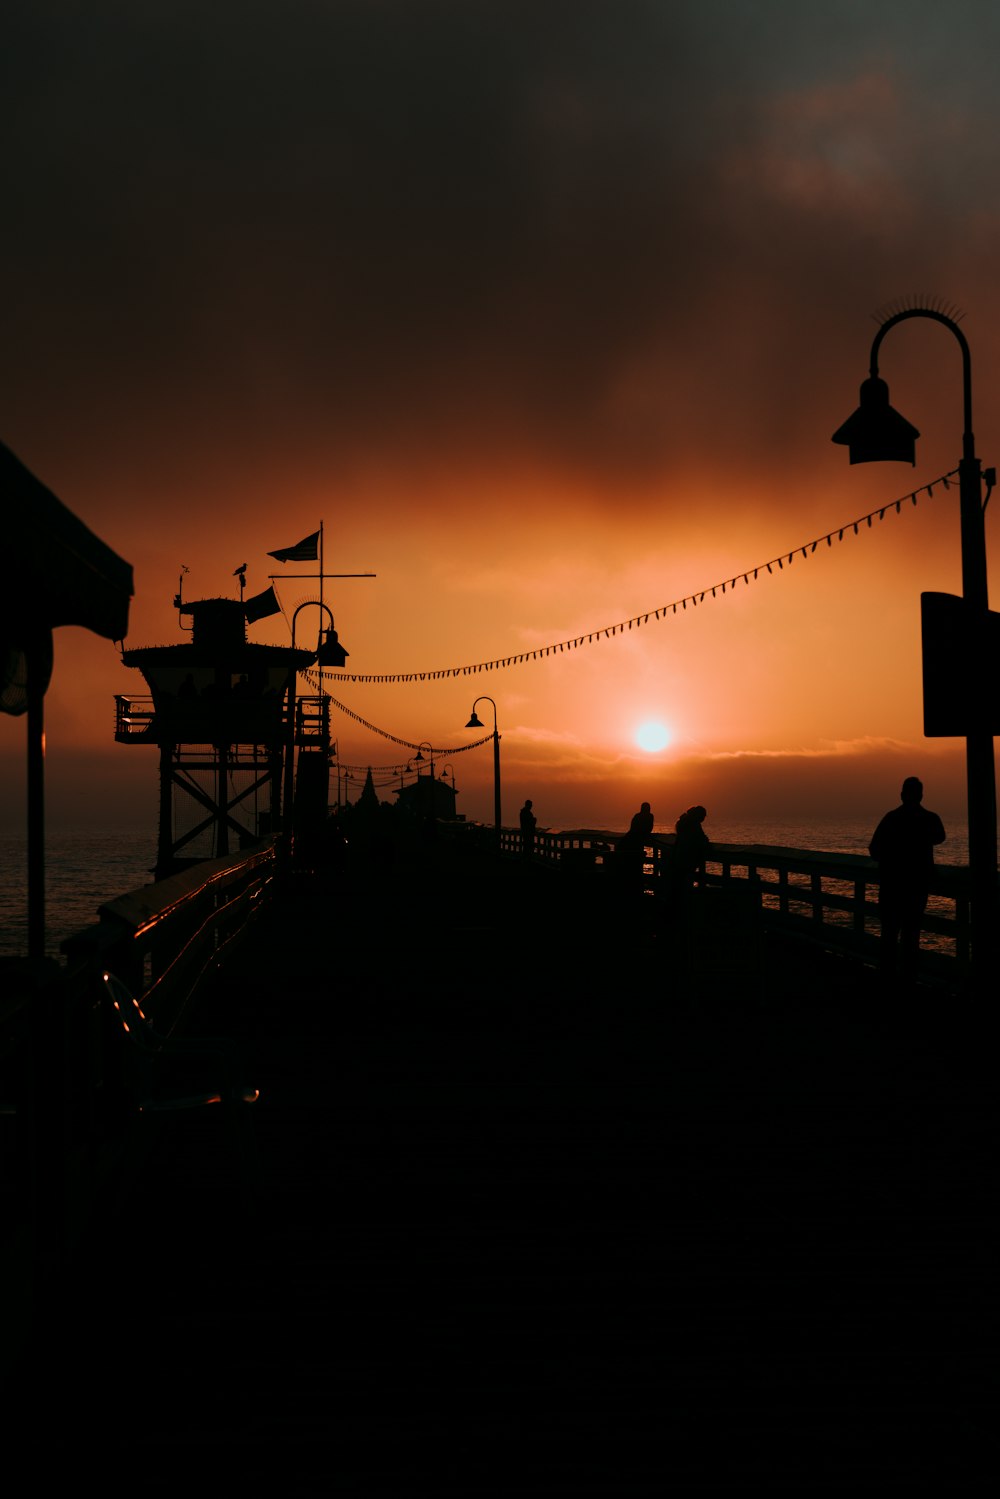 the sun is setting over a pier with people on it